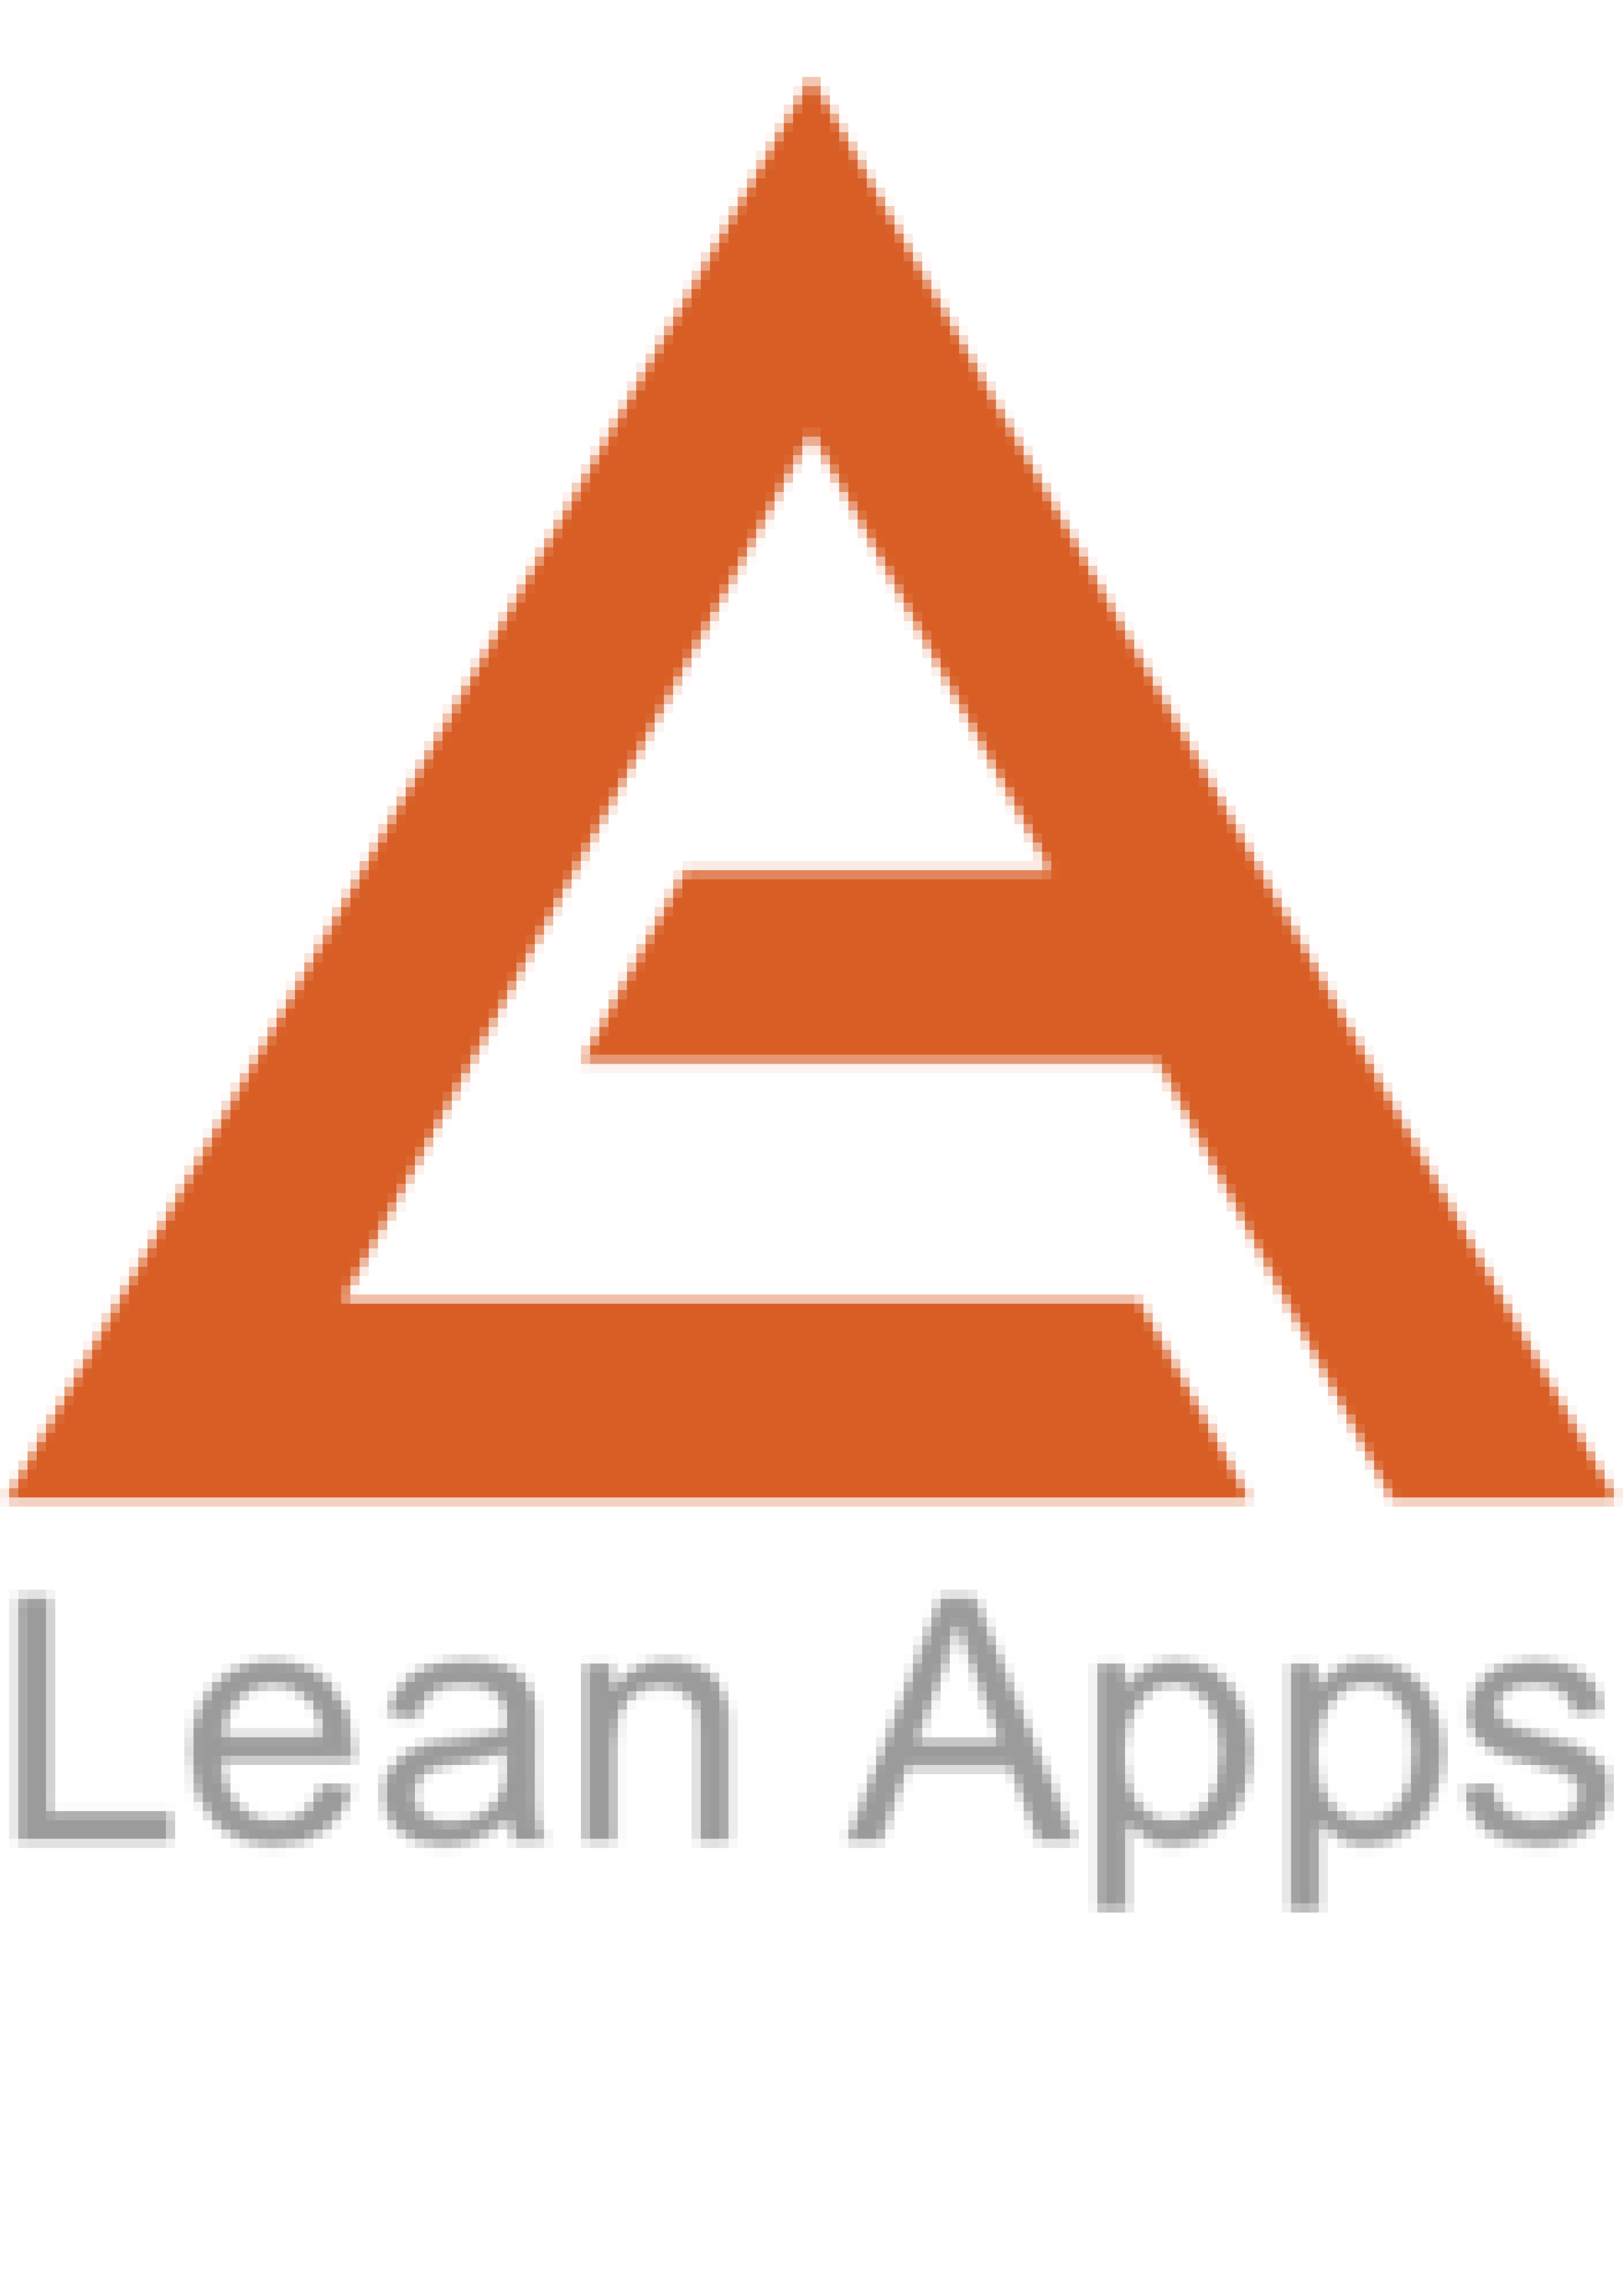     <br>51-200 Employees<br>    <a href=" https://www.theleanapps.com" target="_blank" rel="no referrer noopener nofollow "> https://www.theleanapps.com</a>